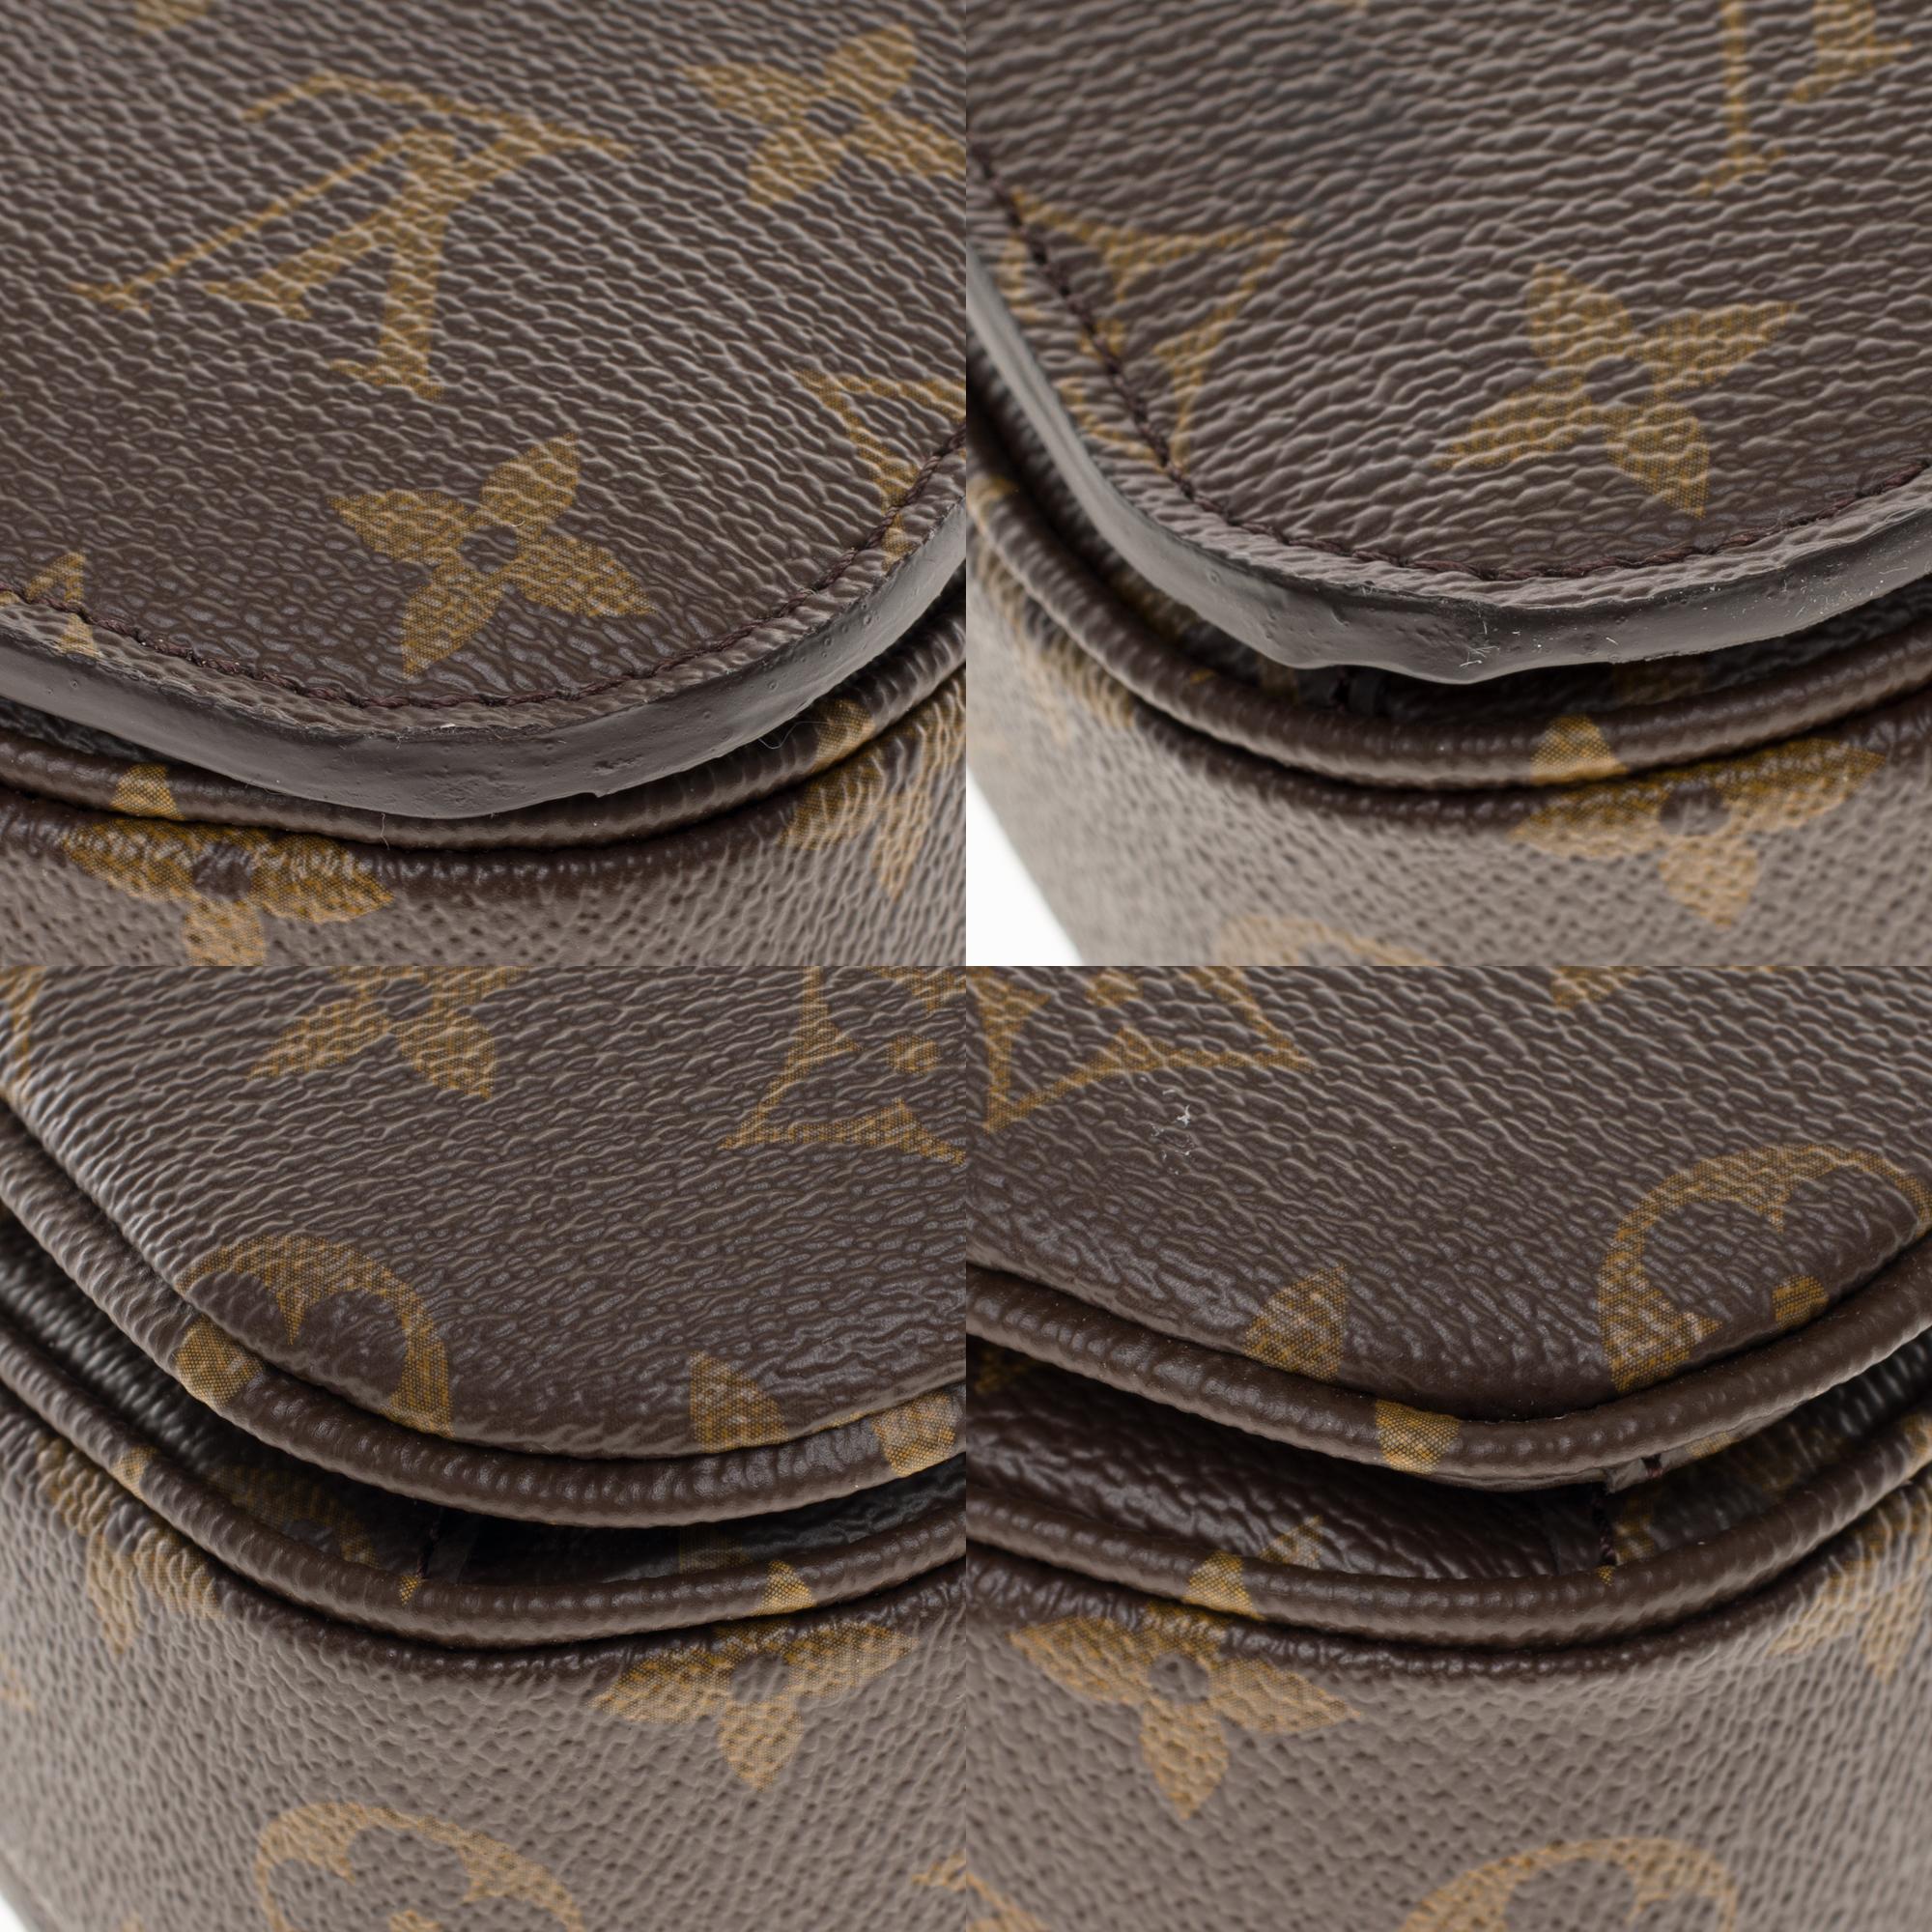 Brand New -The Must have Louis Vuitton Metis Shoulder bag in Monogram canvas ! 4